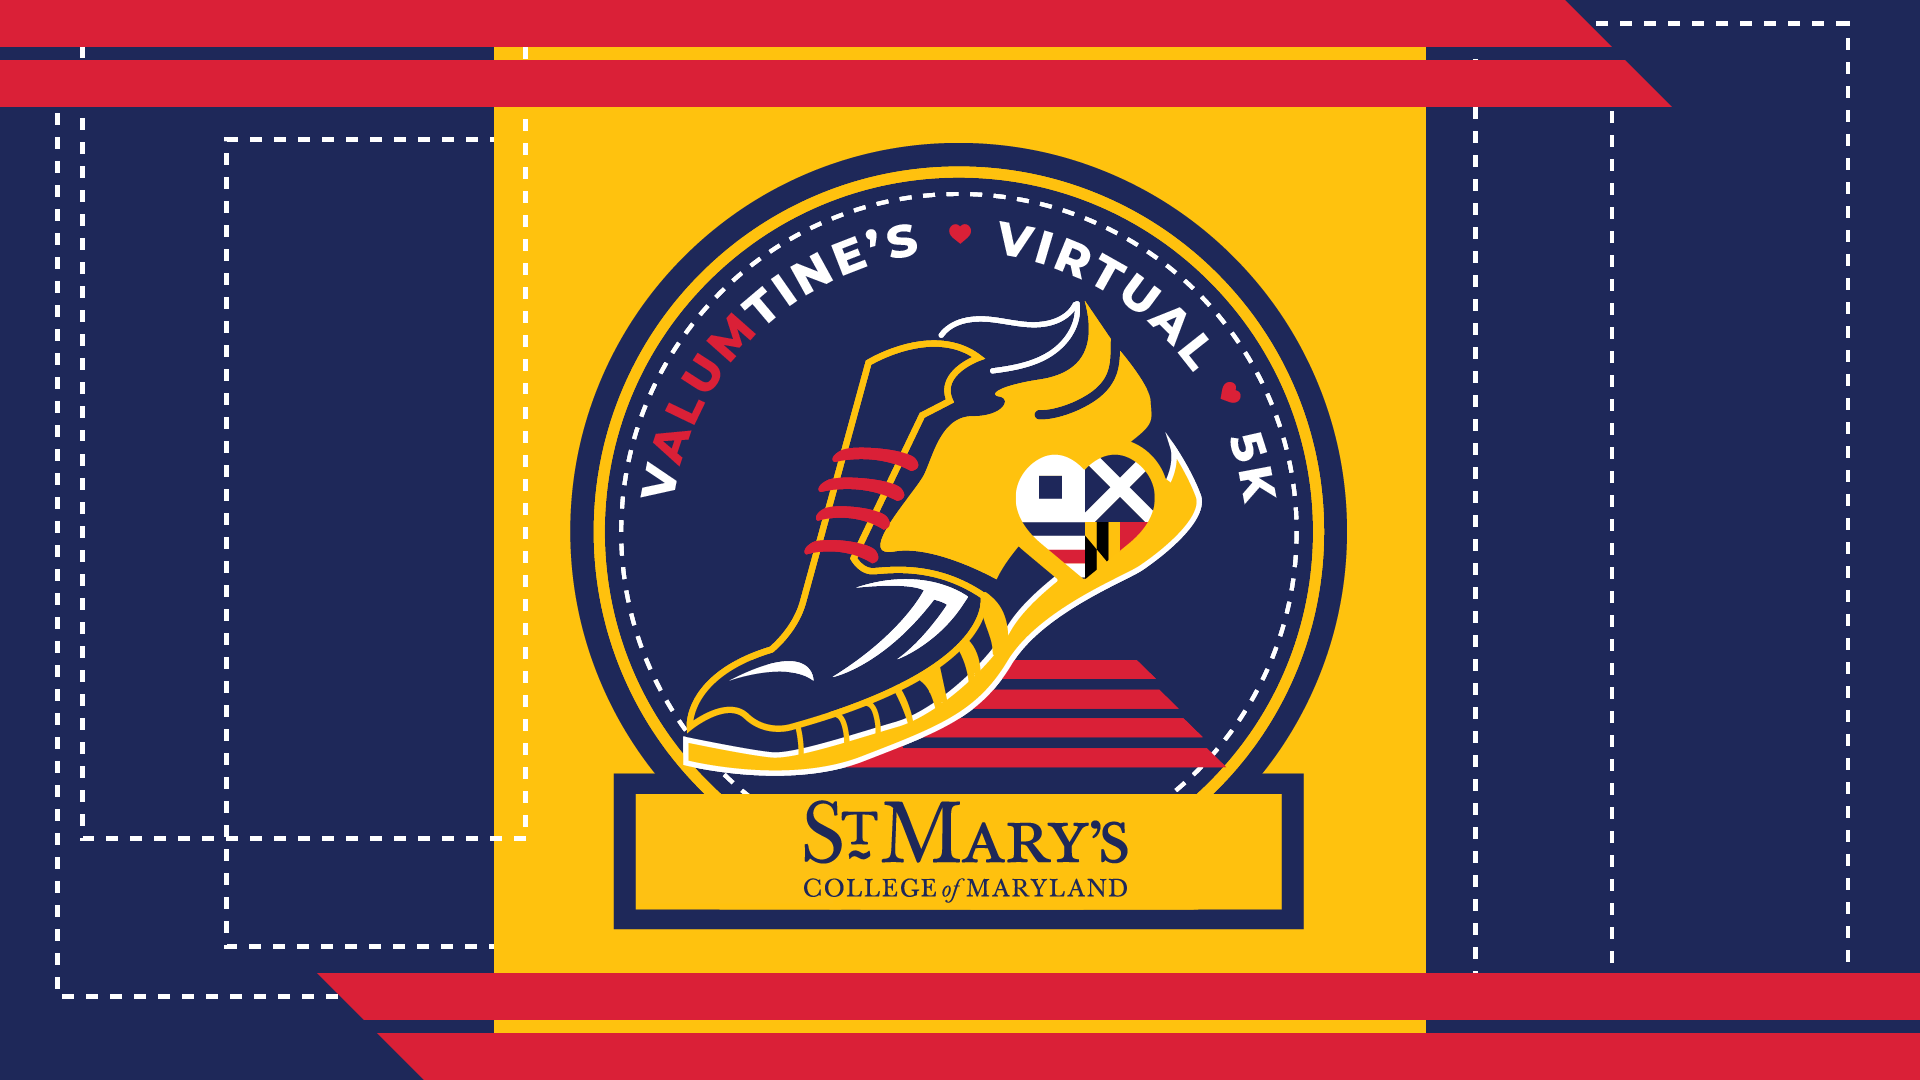 Navy, gold and yellow box with a running shoe logo and the text, SMCM Valumtine's Day Virtual 5K, St. Mary's College of Maryland